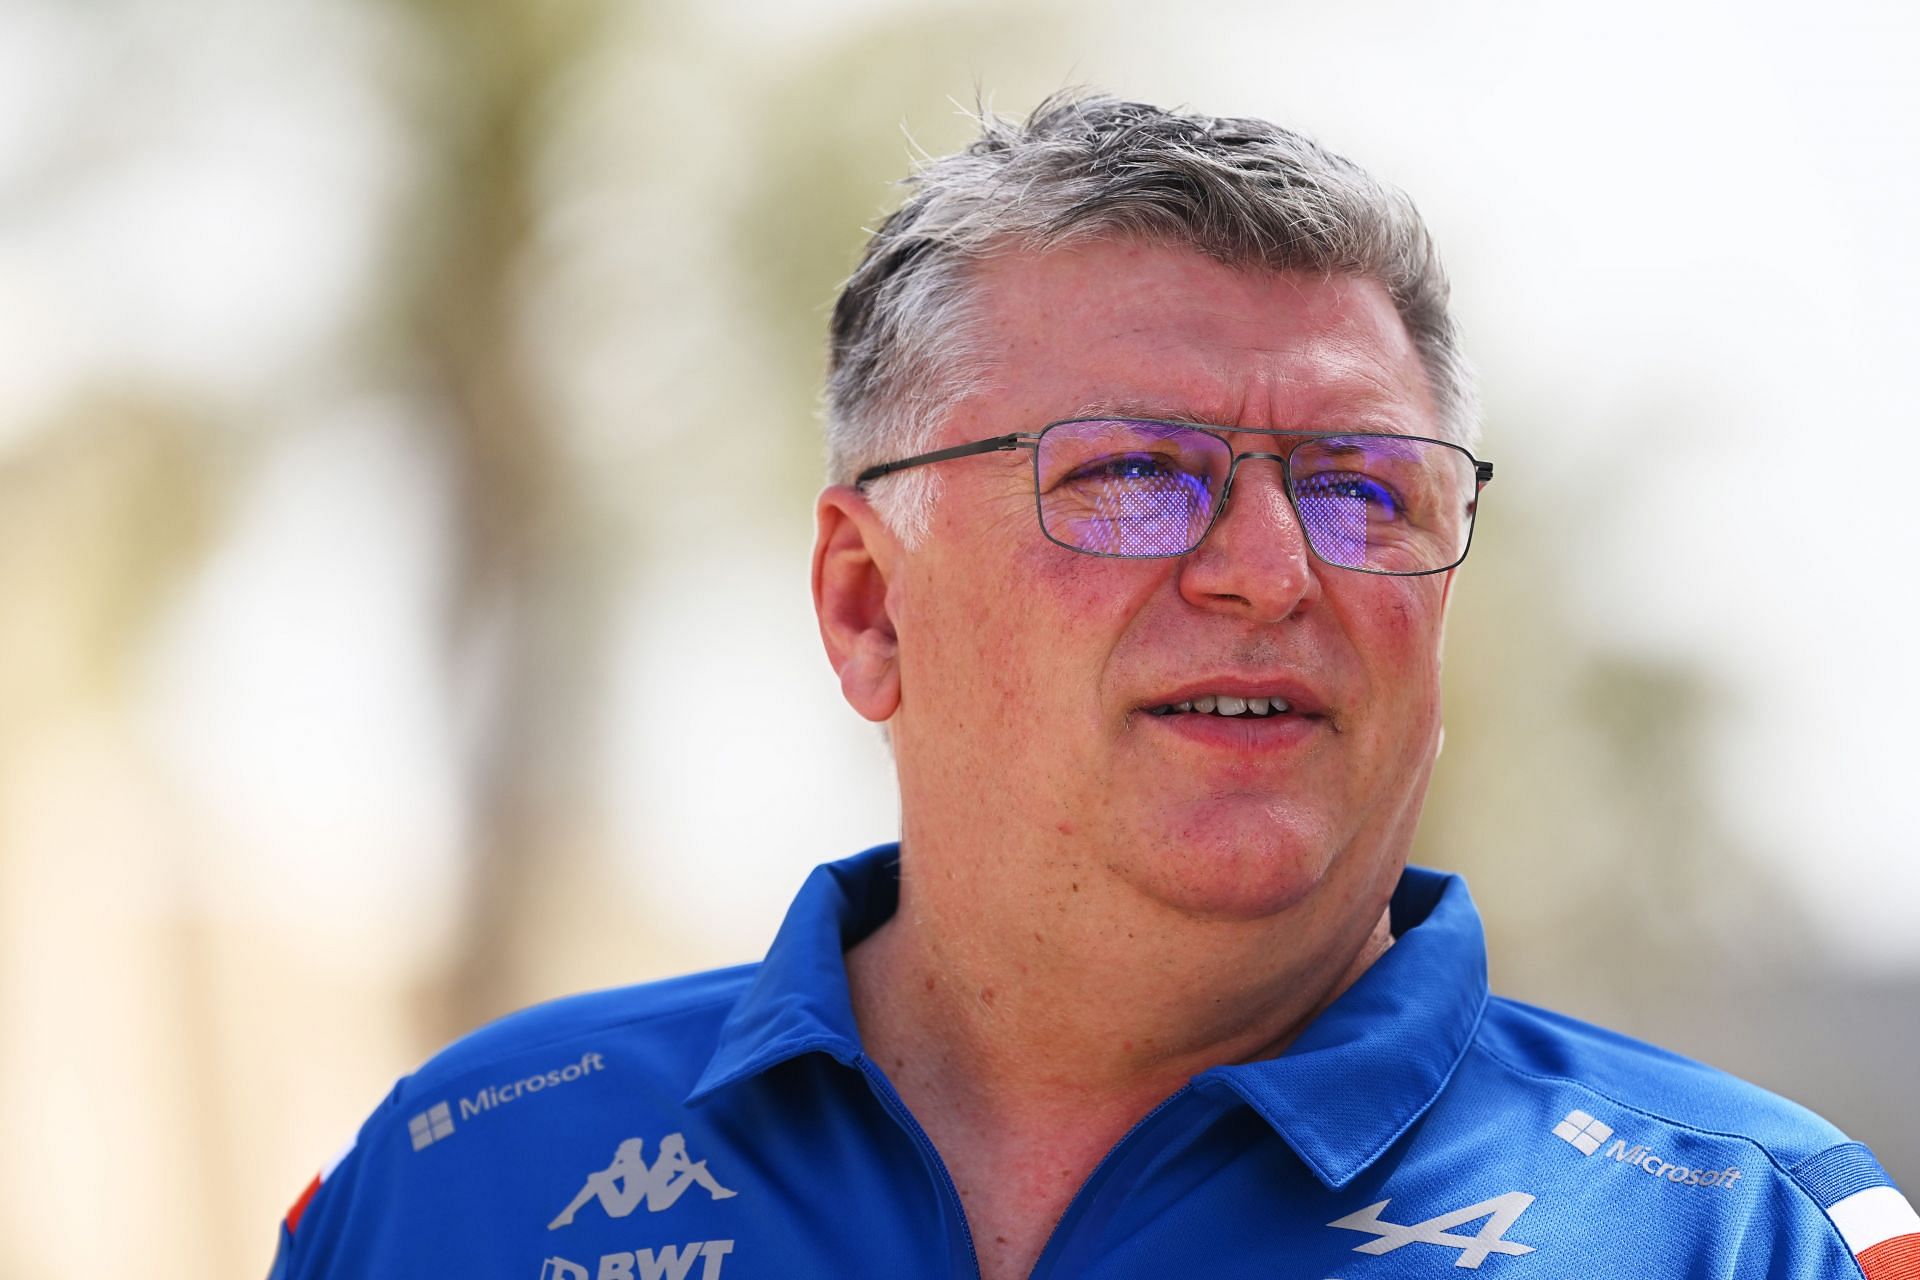 Otmar Szafnauer, Team Principal of Alpine F1, looks on in the Paddock before final practice ahead of the F1 Grand Prix of Bahrain at Bahrain International Circuit on March 19, 2022 (Photo by Clive Mason/Getty Images)